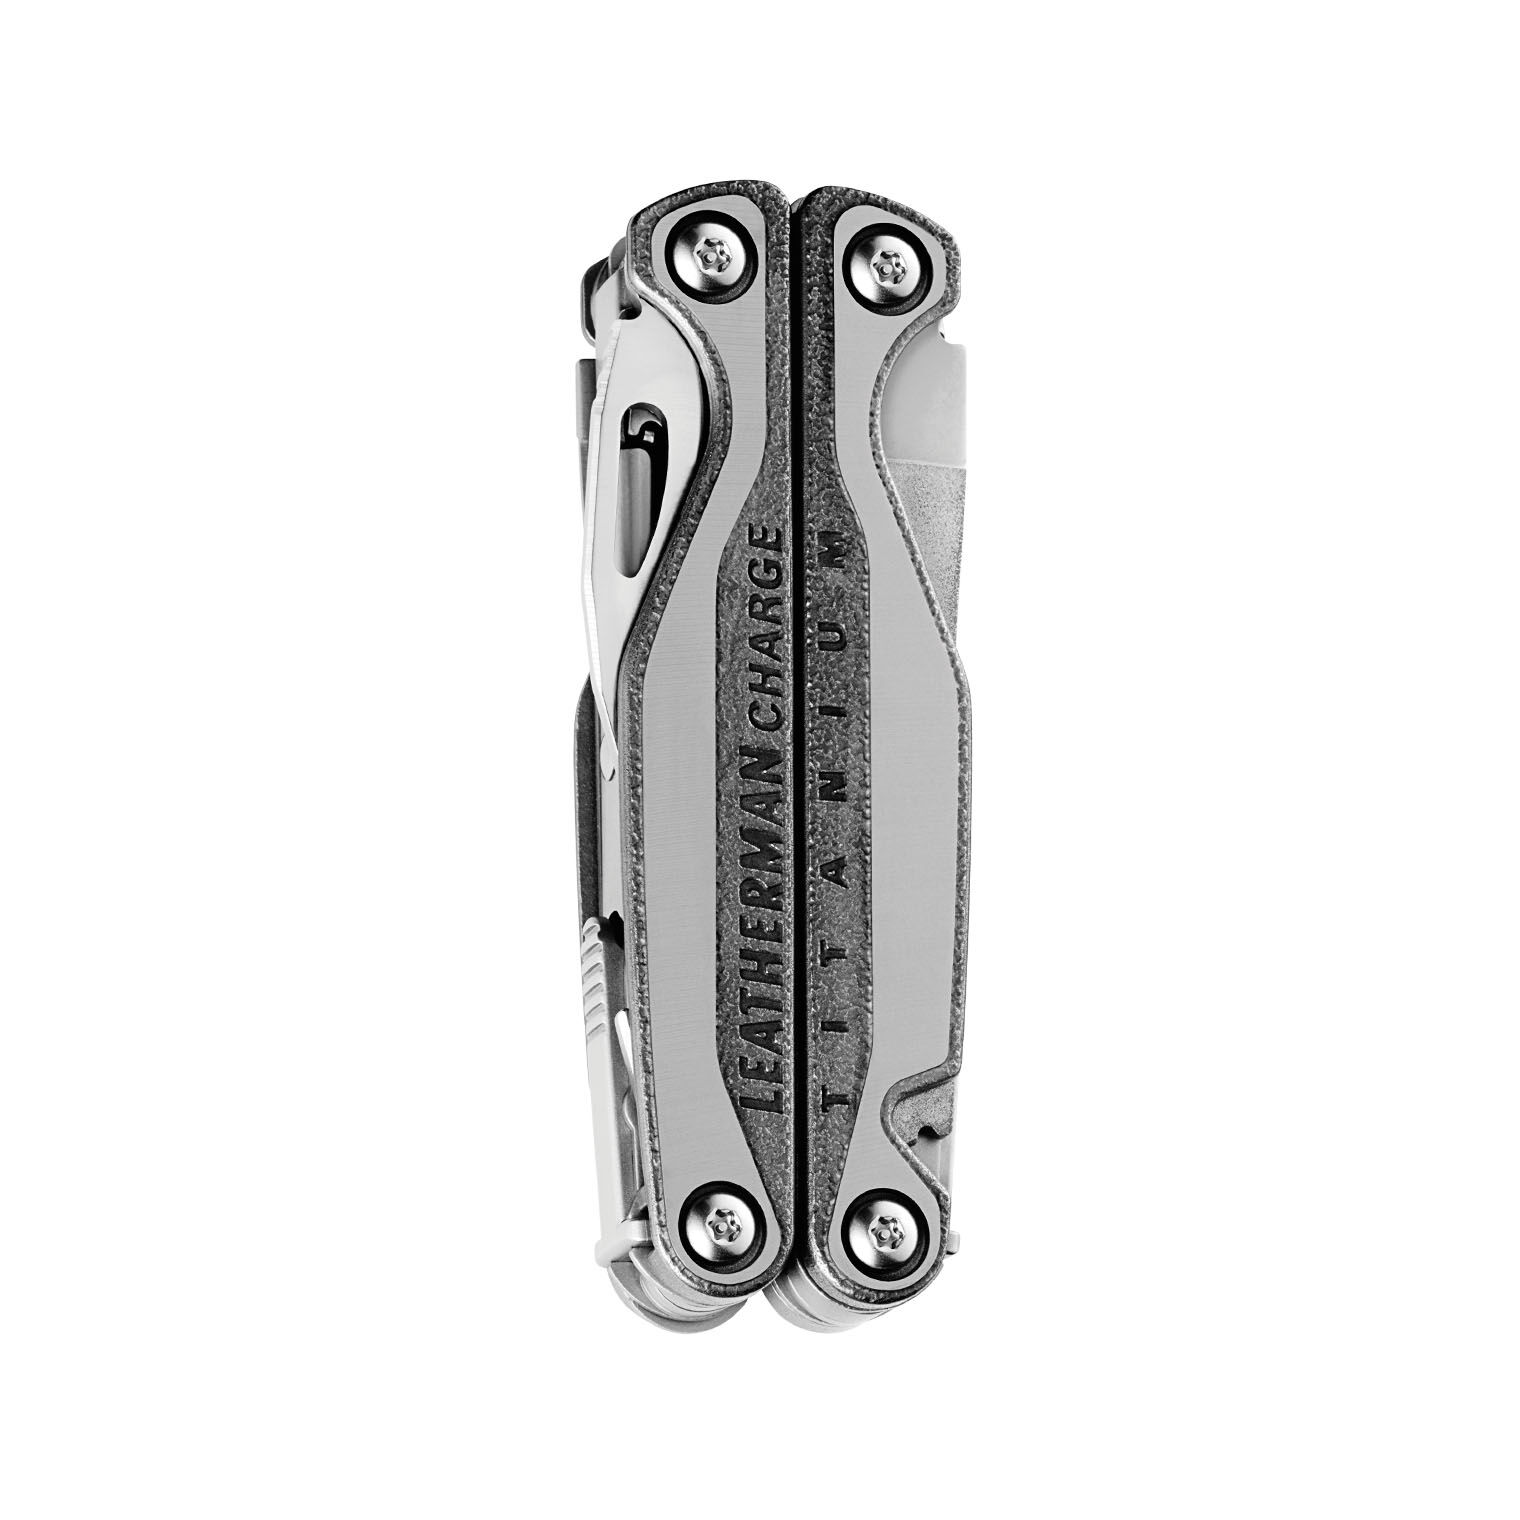 Leatherman Charge Tti 2017 Titanium Scales Replacement And Other Parts 